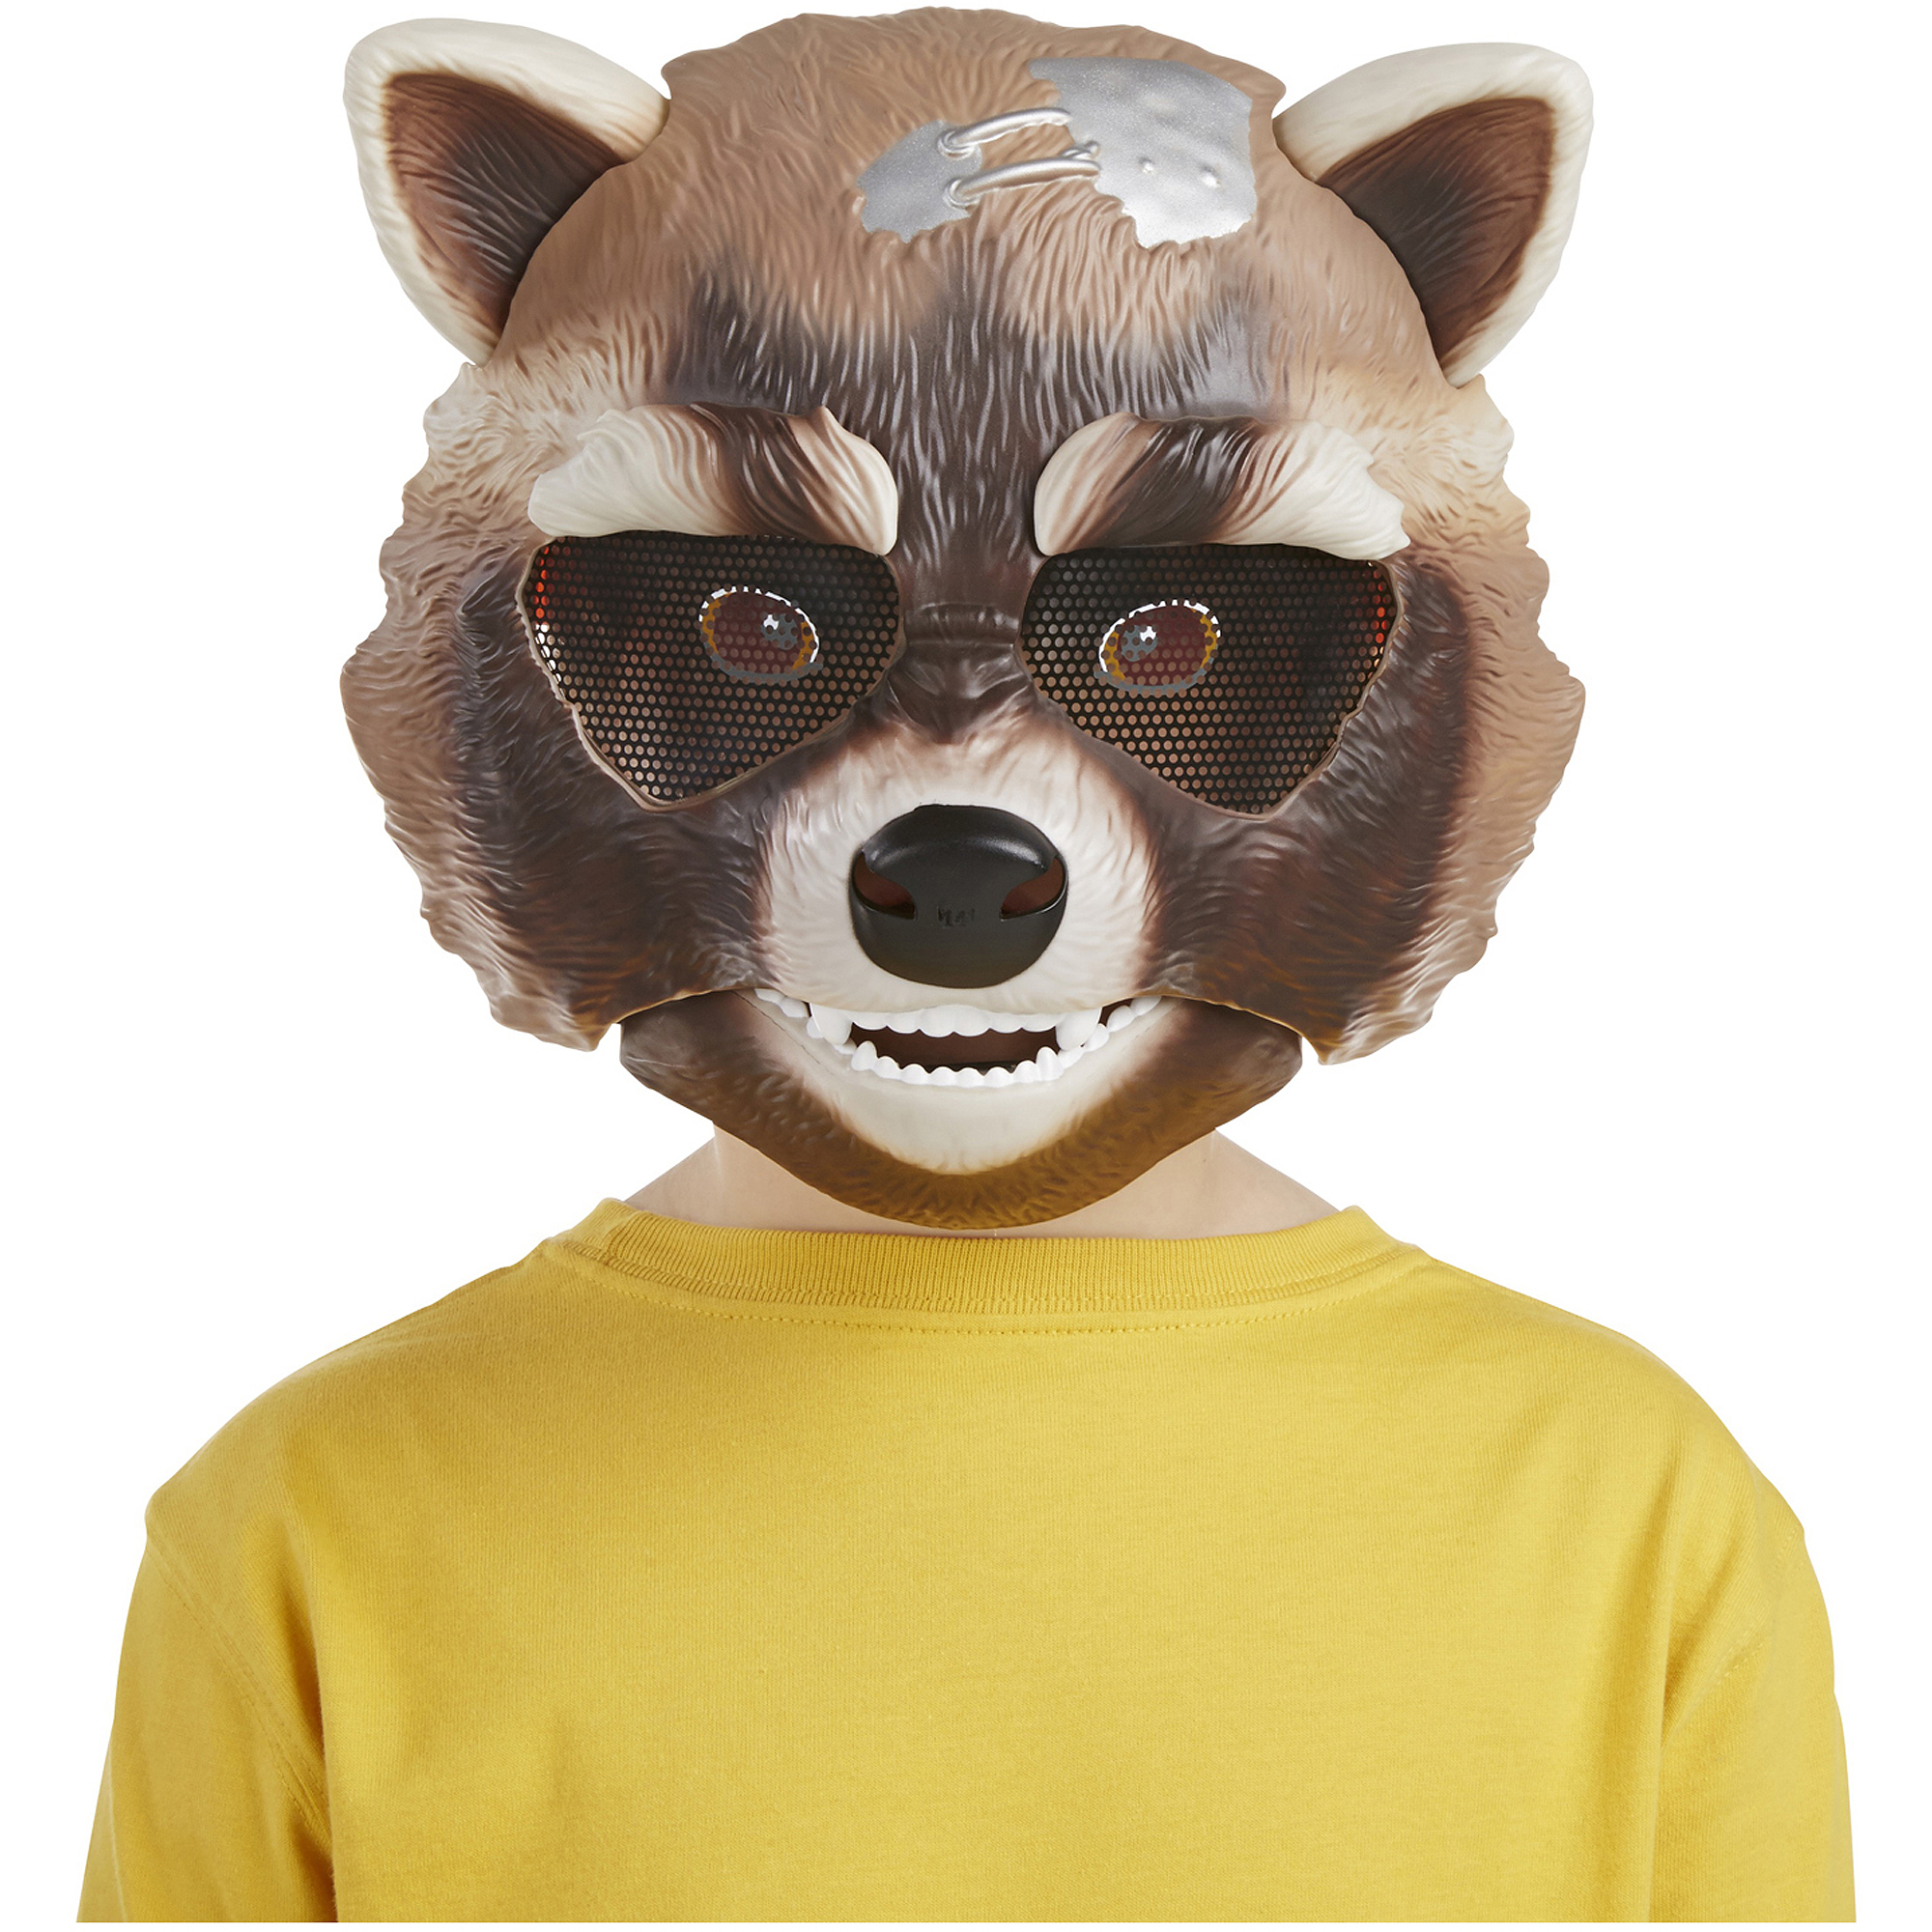 Marvel Guardians of the Galaxy Rocket Raccoon Action Mask - image 1 of 5